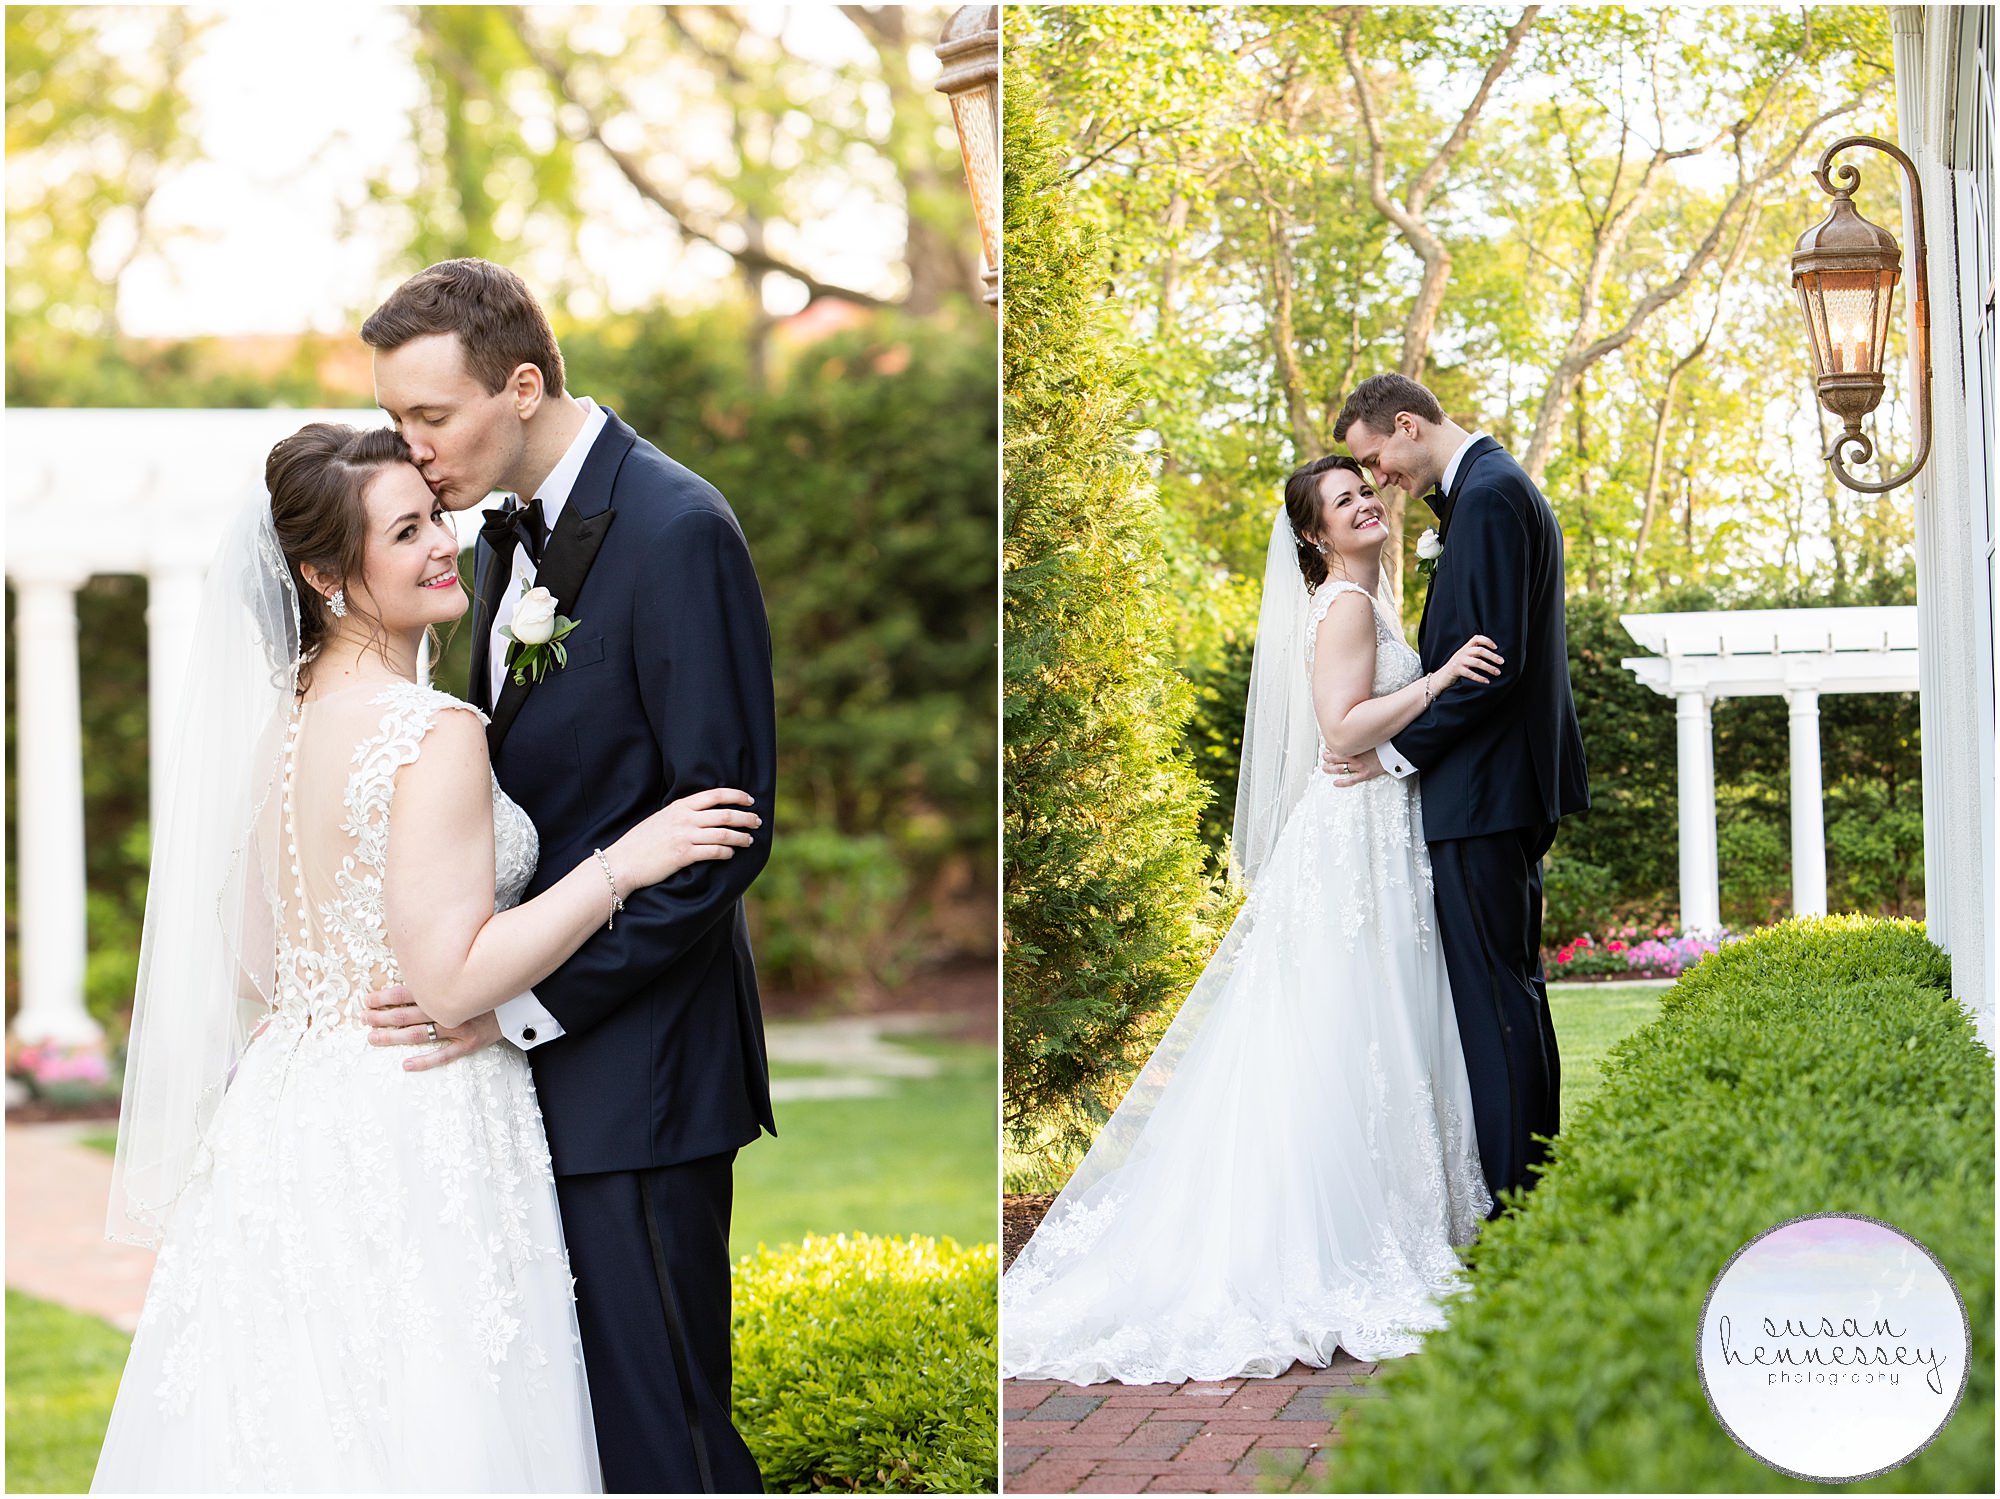 A happy bride and groom at their spring wedding